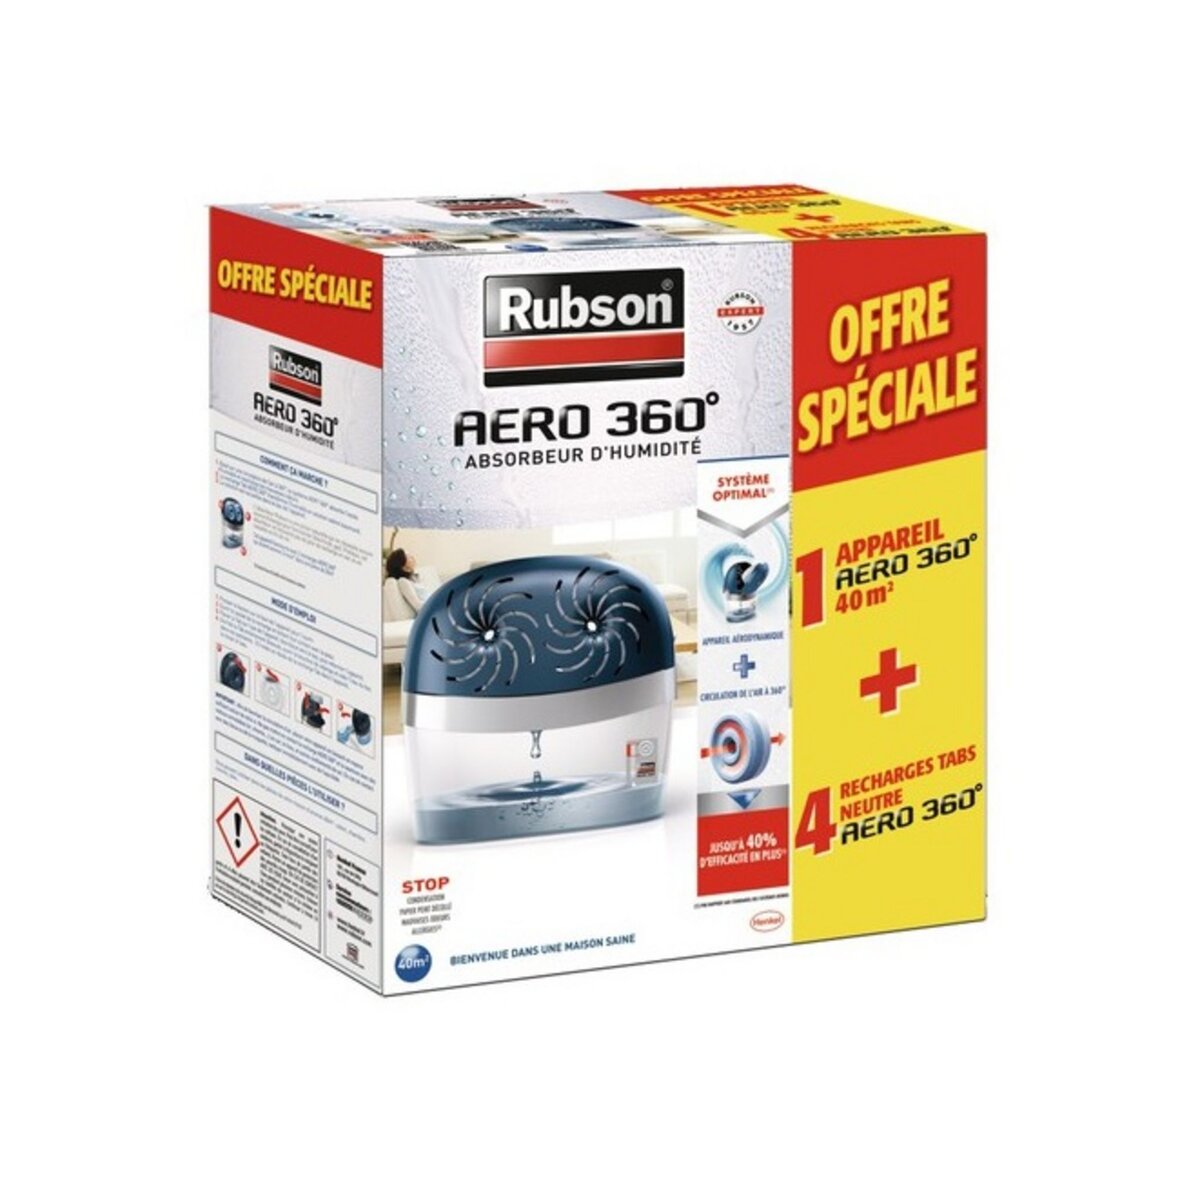 RUBSON Absorbeur d'humidité AERO 360 40m² + 4 recharges